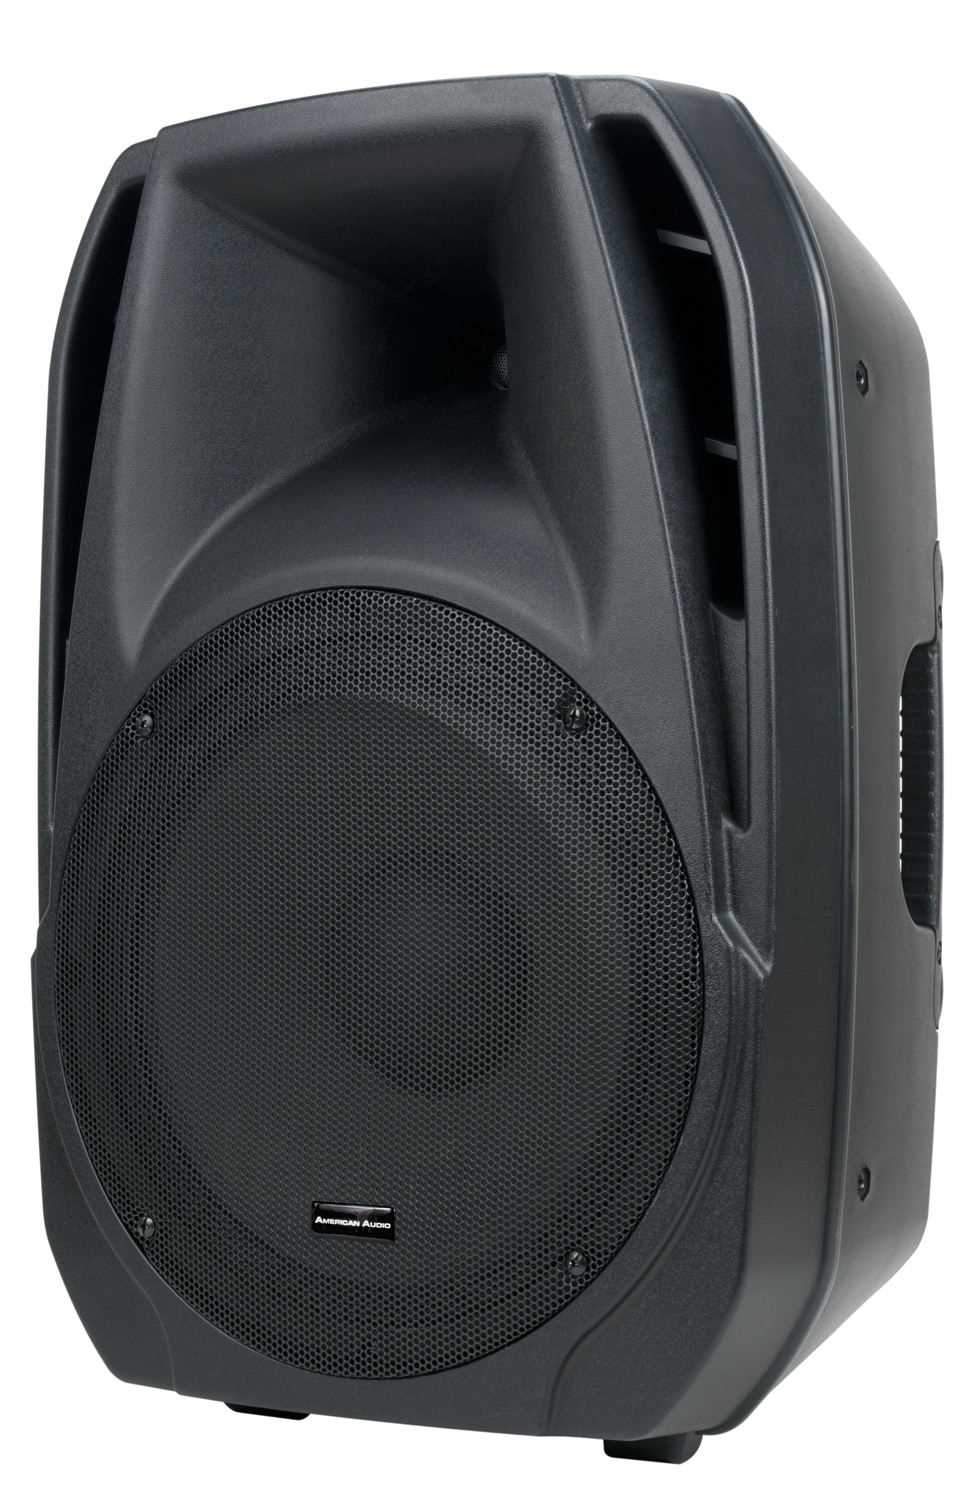 American Audio ELS15A-USB 15inch Powered Speaker - ProSound and Stage Lighting